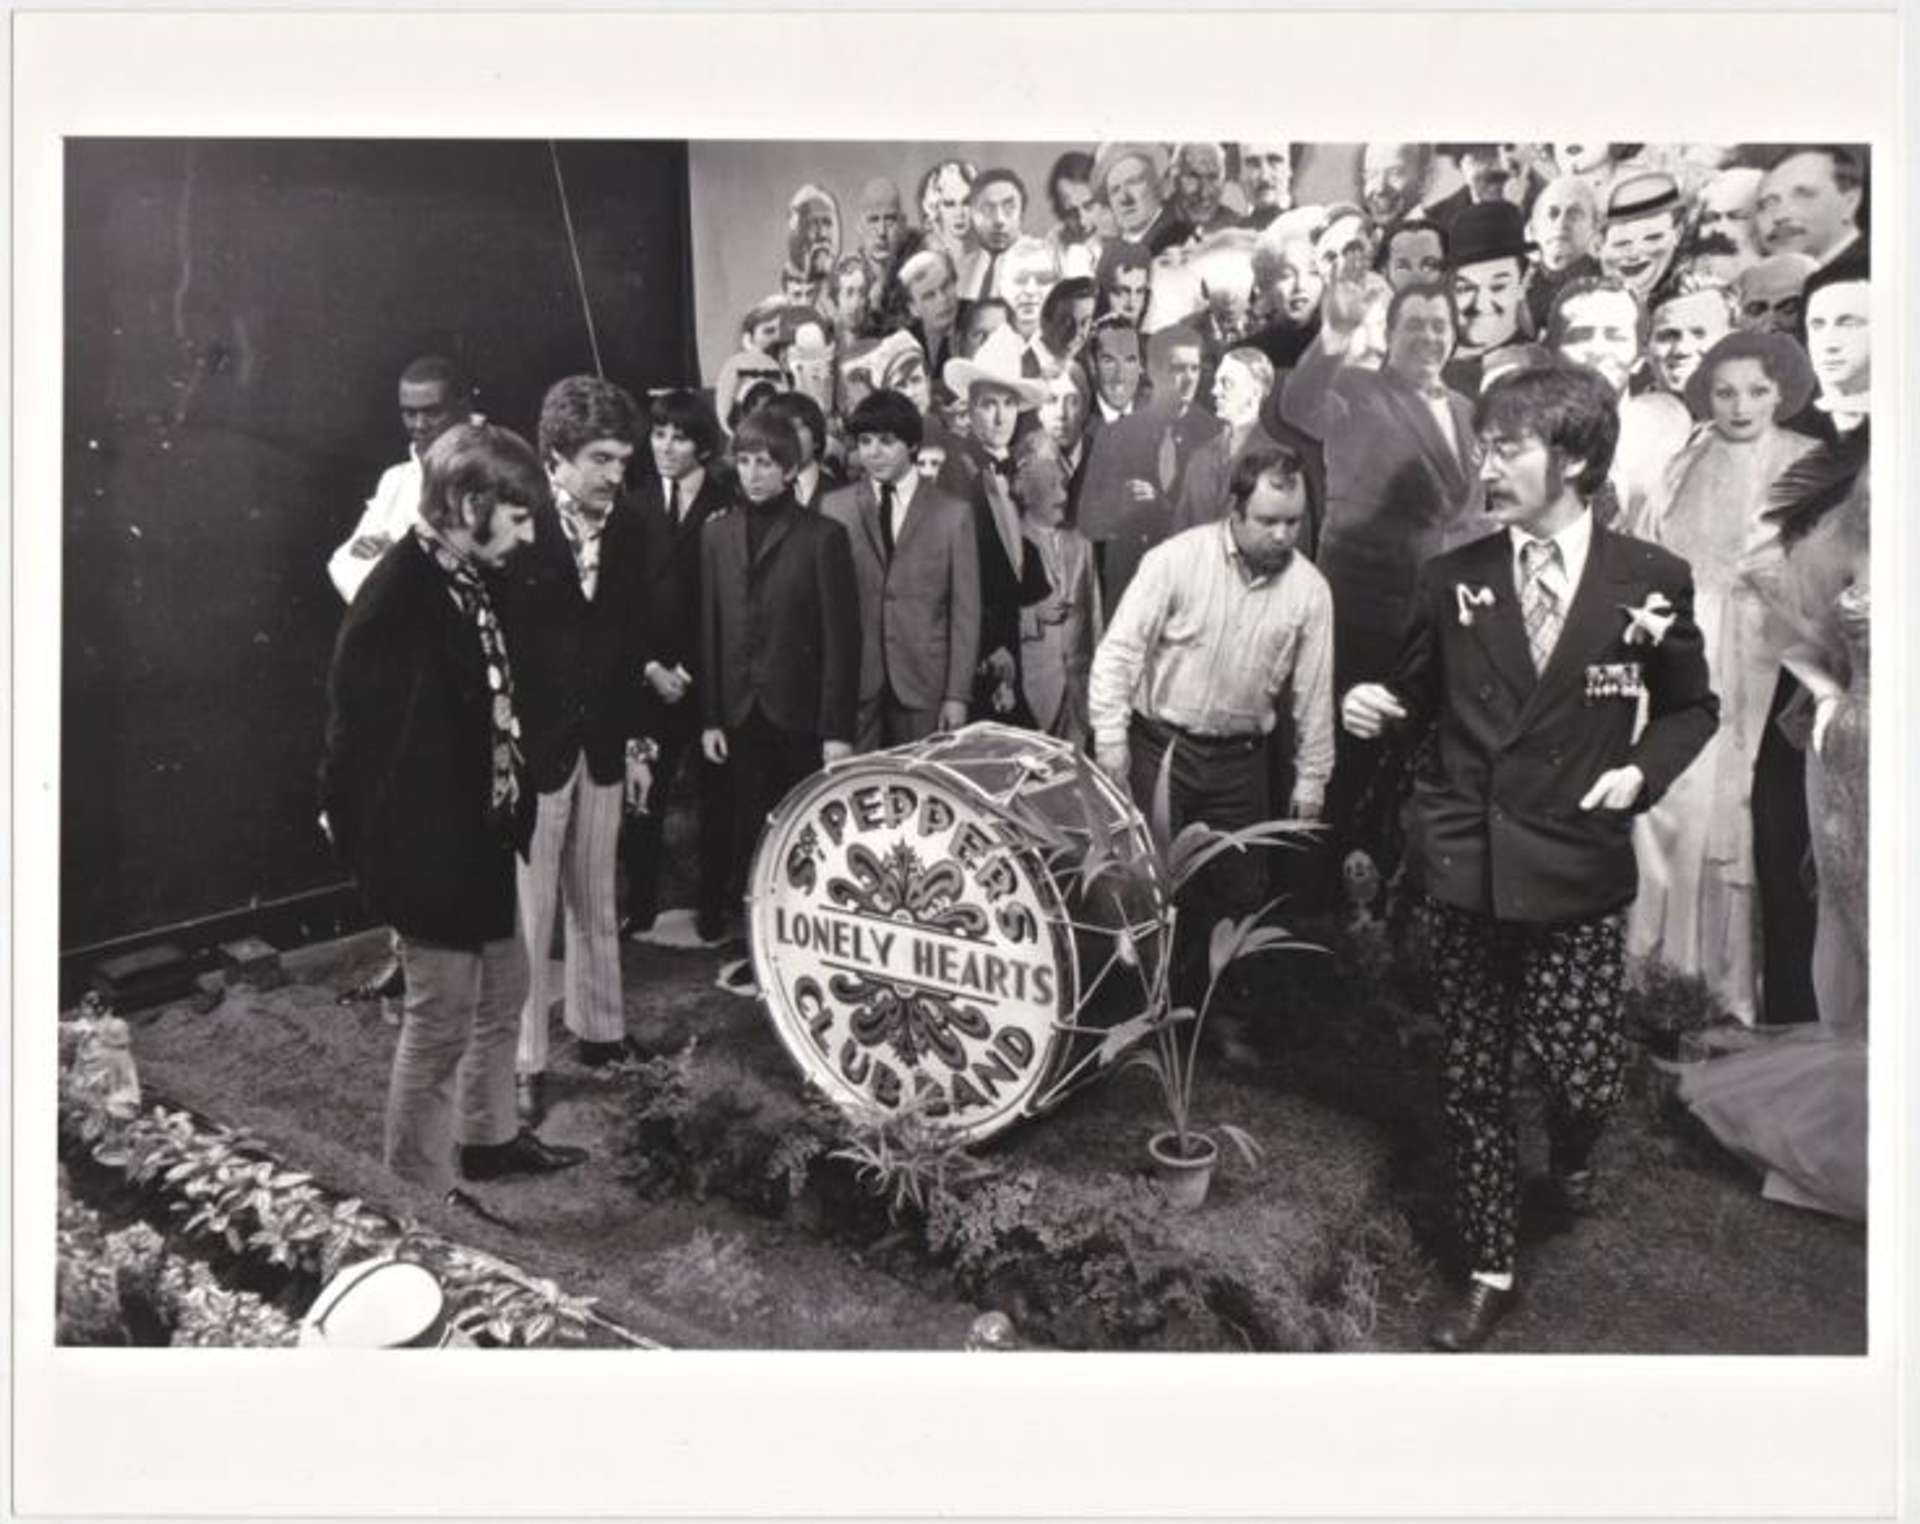 A black and white photograph of the band The Beatles and artist Peter Blake at the cover shoot for their album Sgt. Pepper’s Lonely Hearts Club Band.